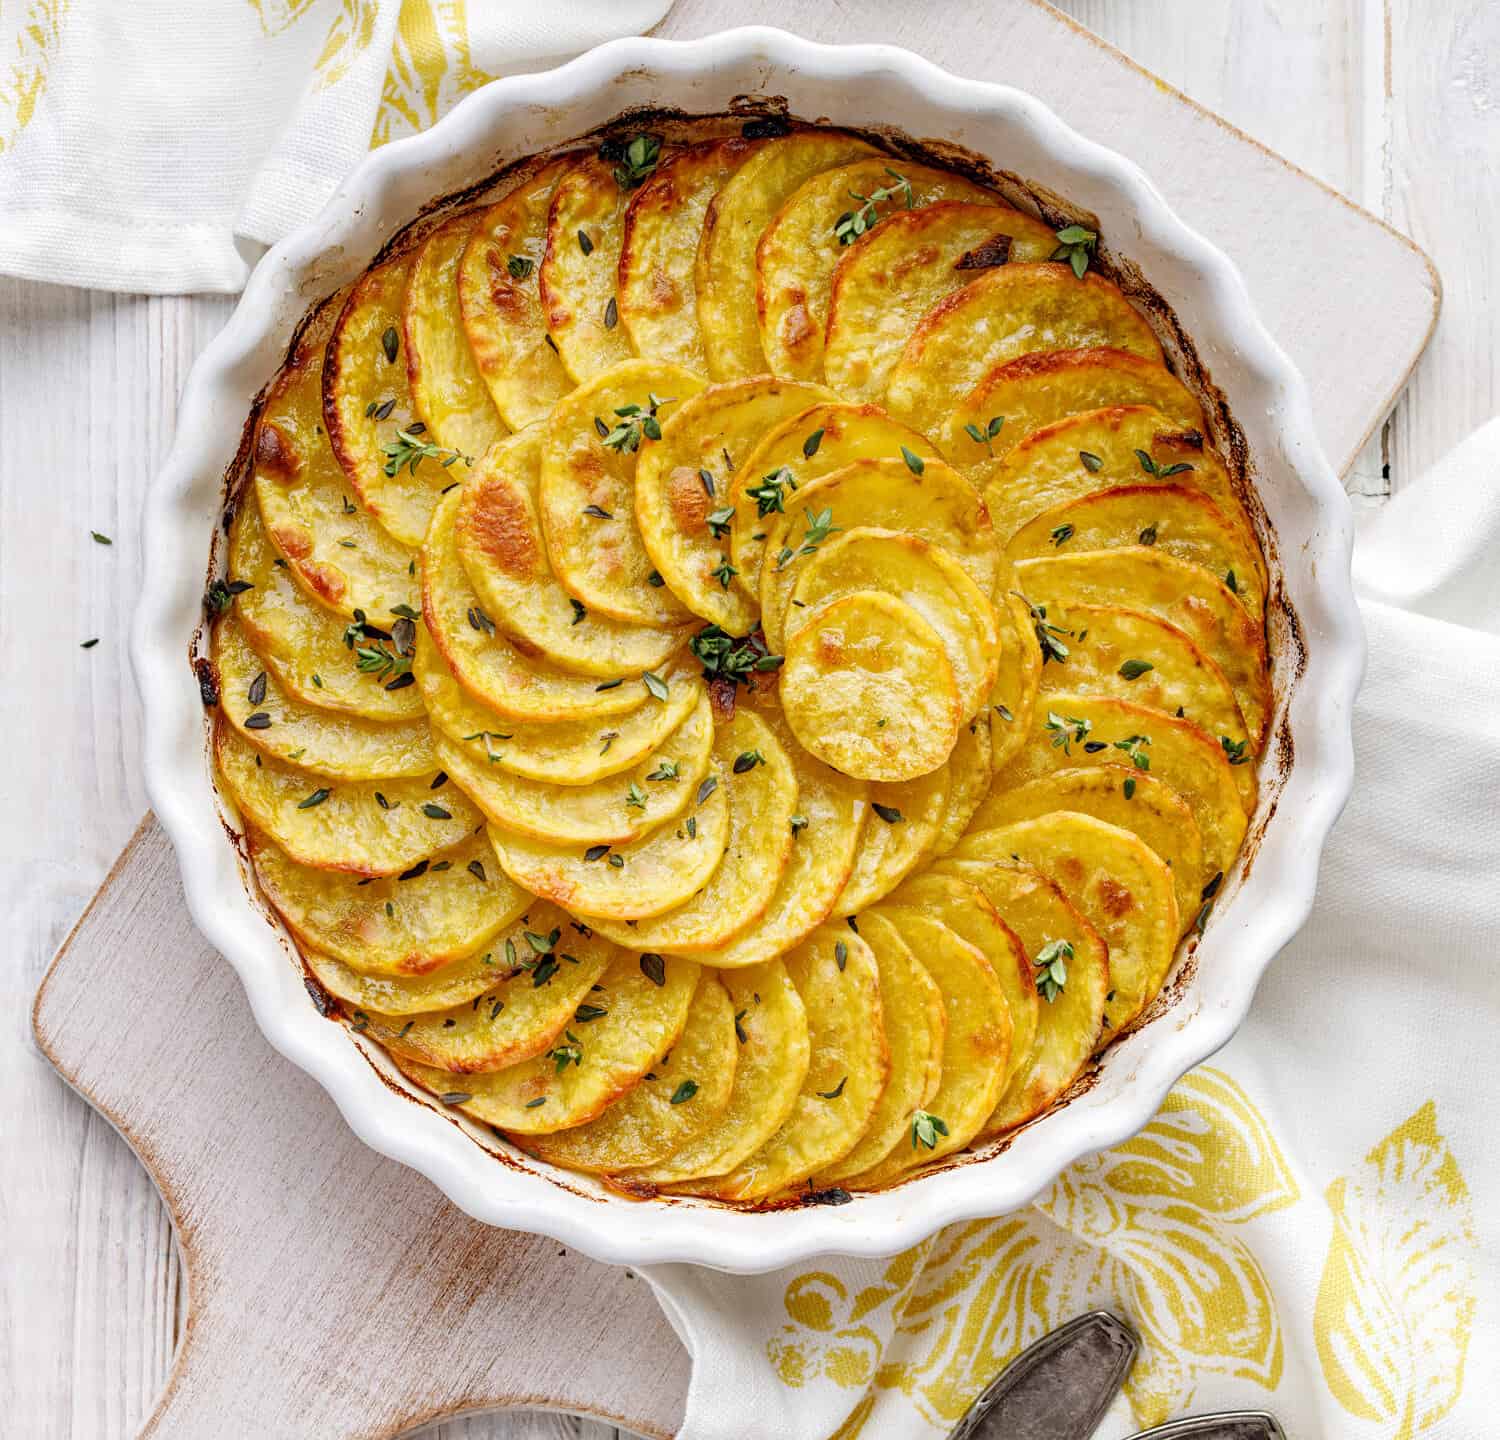 Scalloped potatoes, potato casserole with the addition of aromatic herbs  in a ceramic baking dish, top view